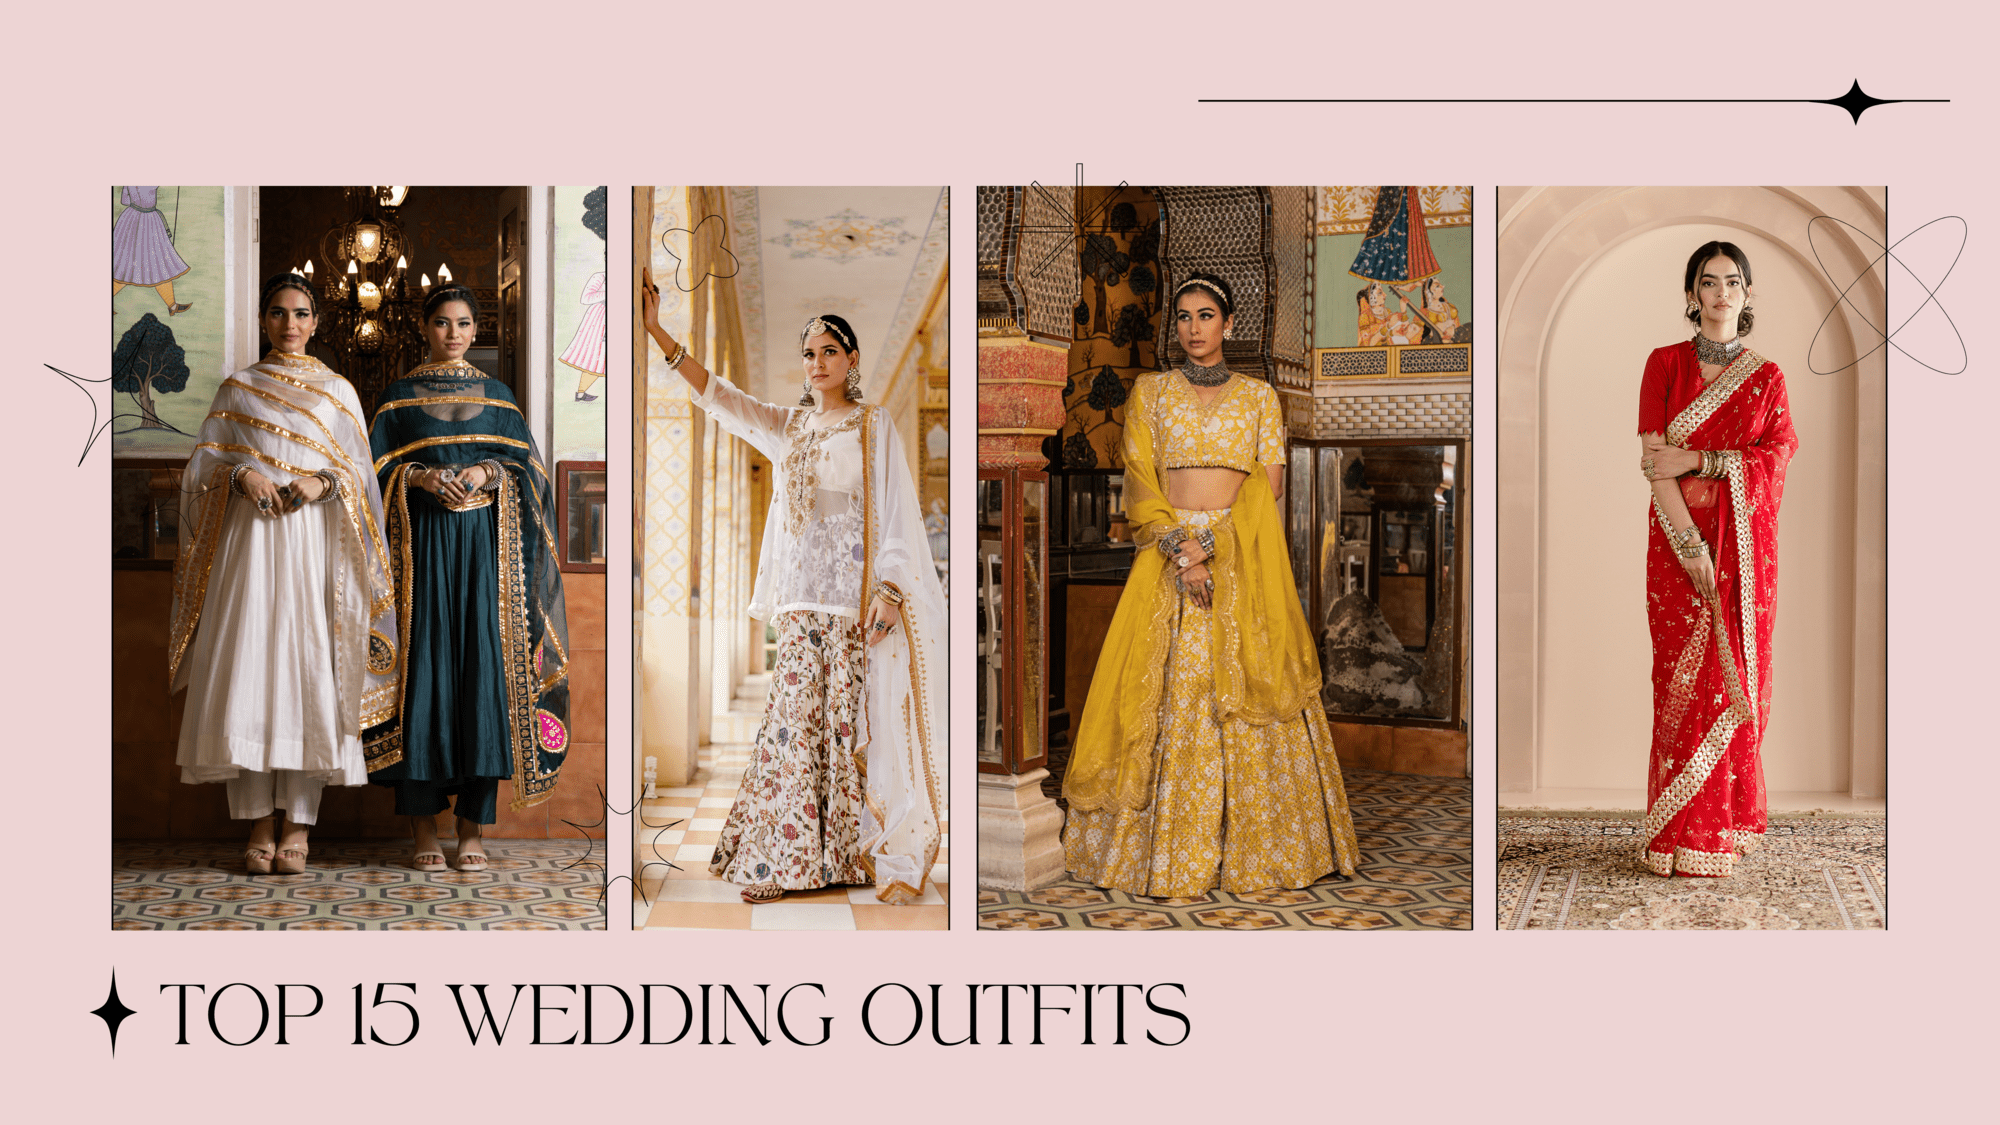 Wedding Outfits For Women